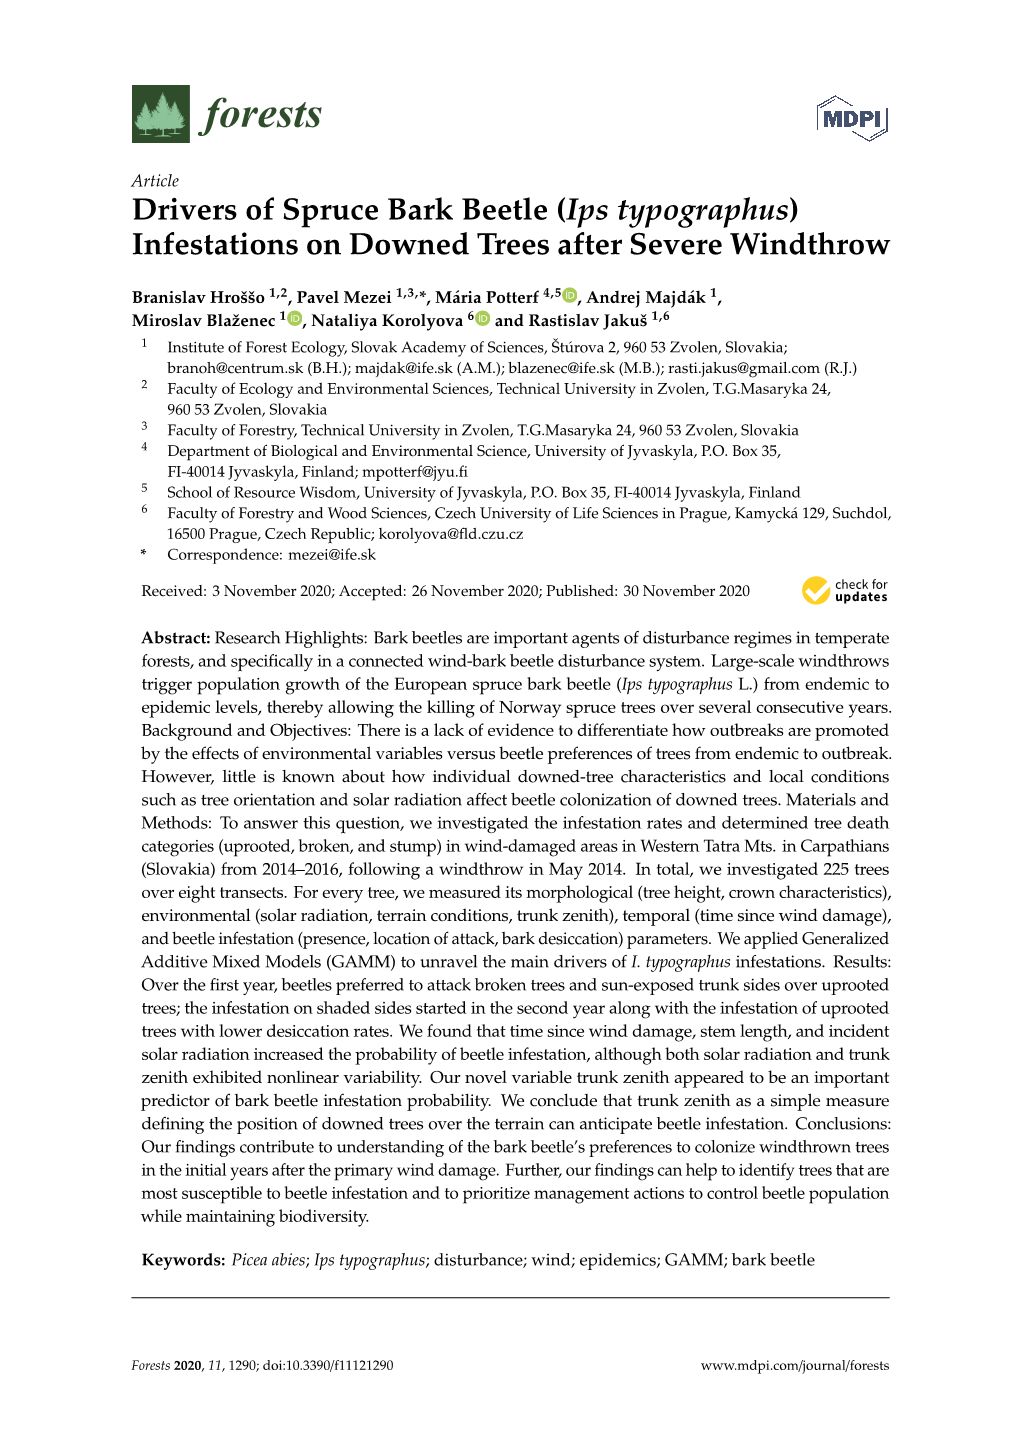 Ips Typographus) Infestations on Downed Trees After Severe Windthrow